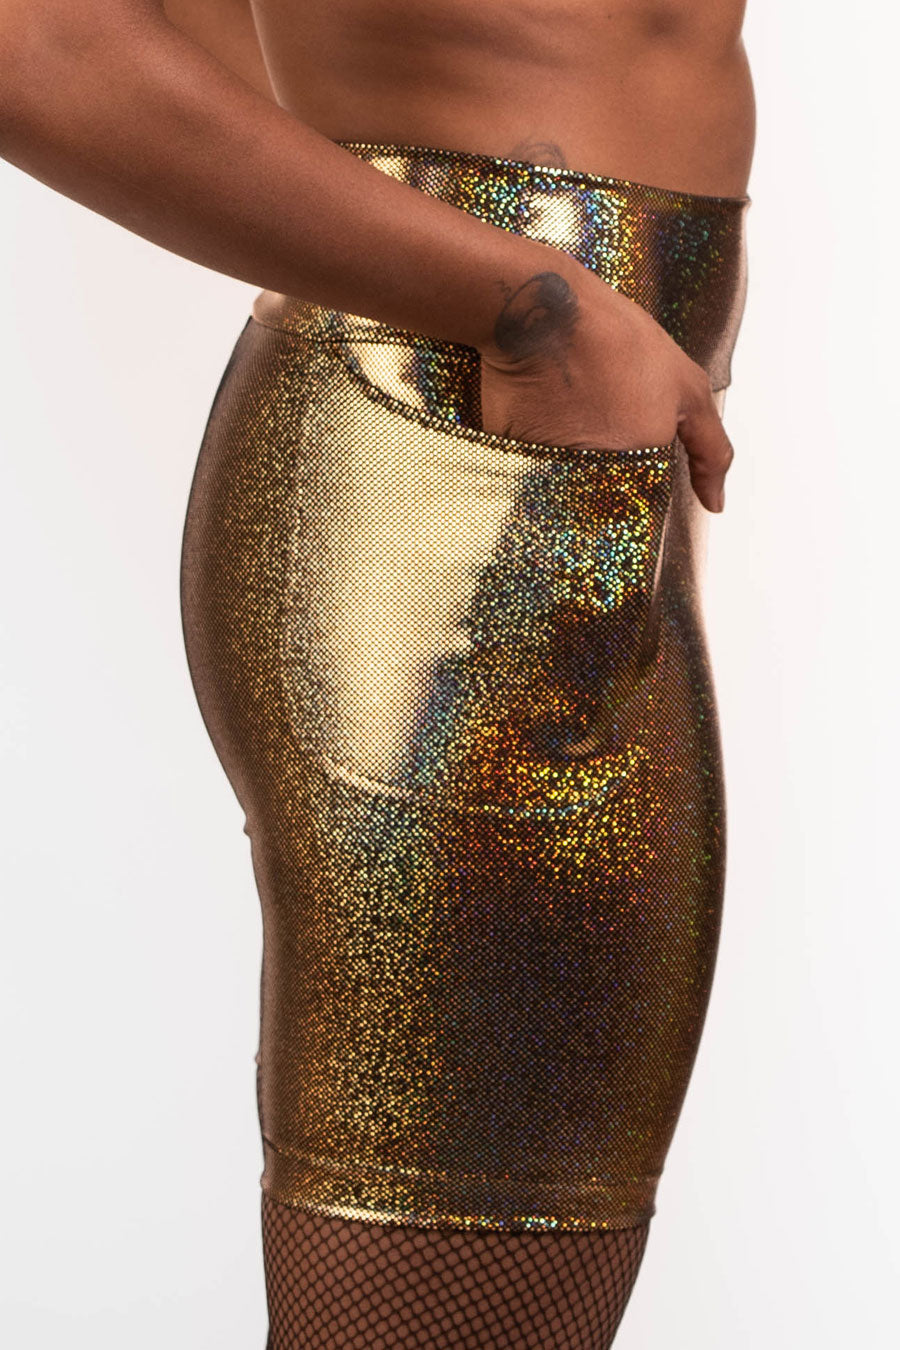 The Ultimate Bike Shorts in the Gold Large-Dot Hologram